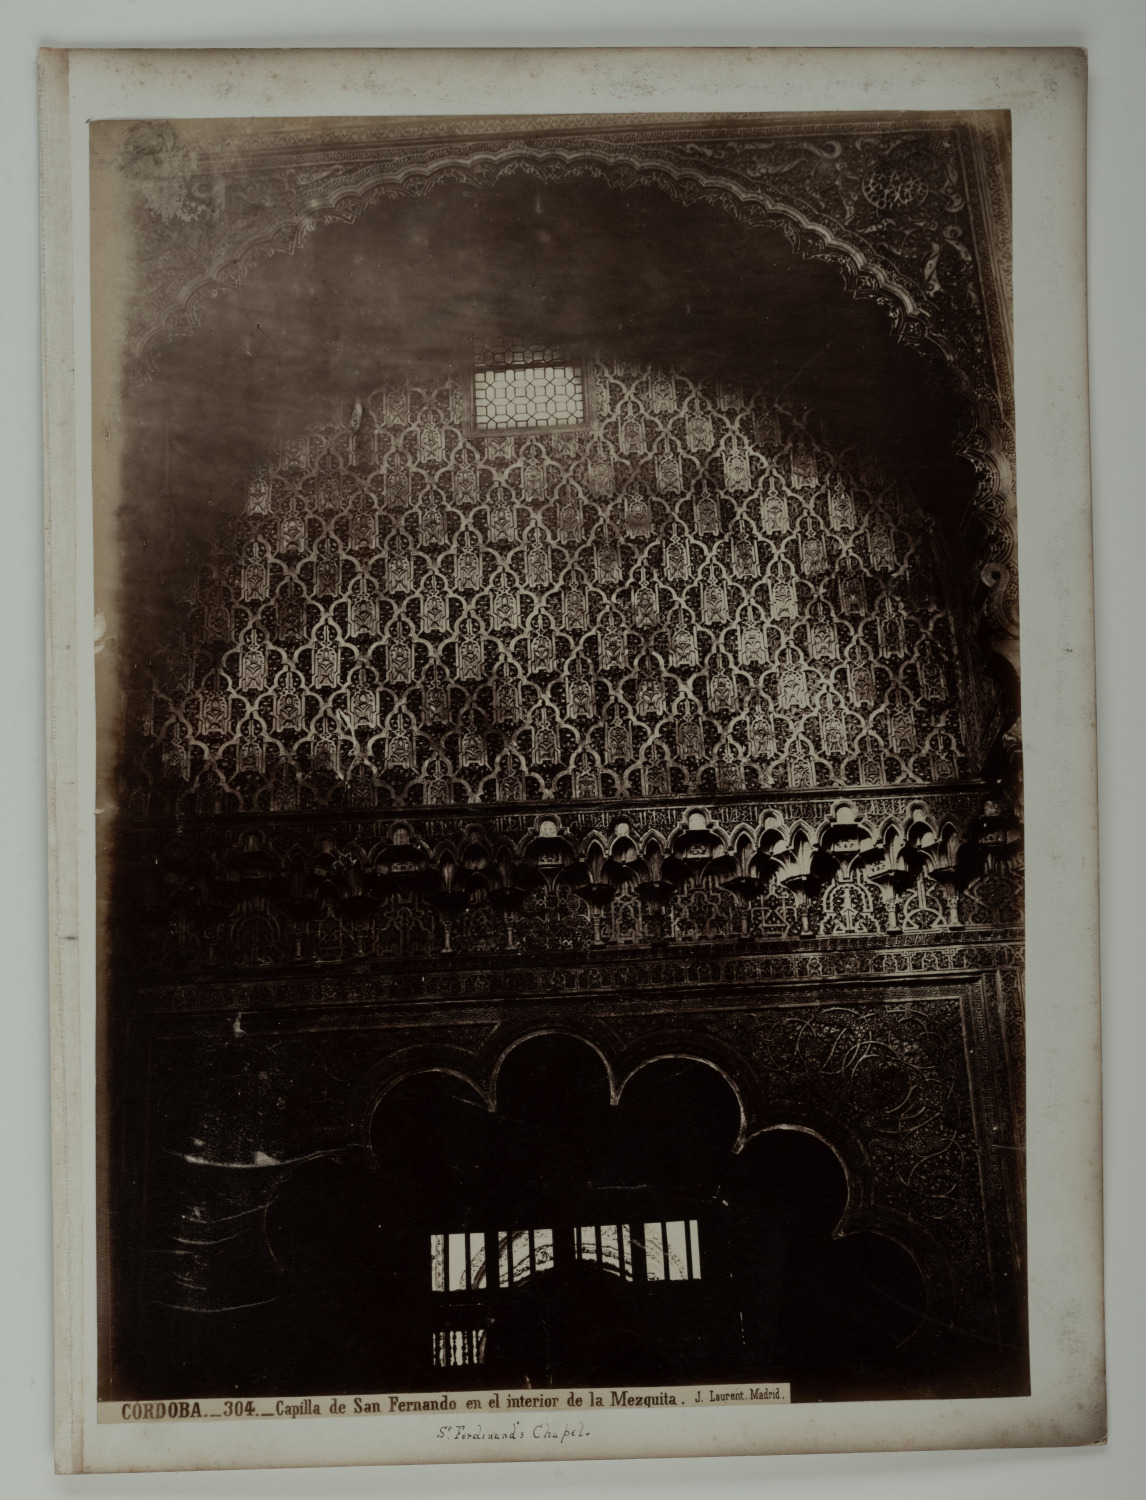 J. Laurent, San Fernando Chapel, interior of the Mosque, Cathedral of Cordo